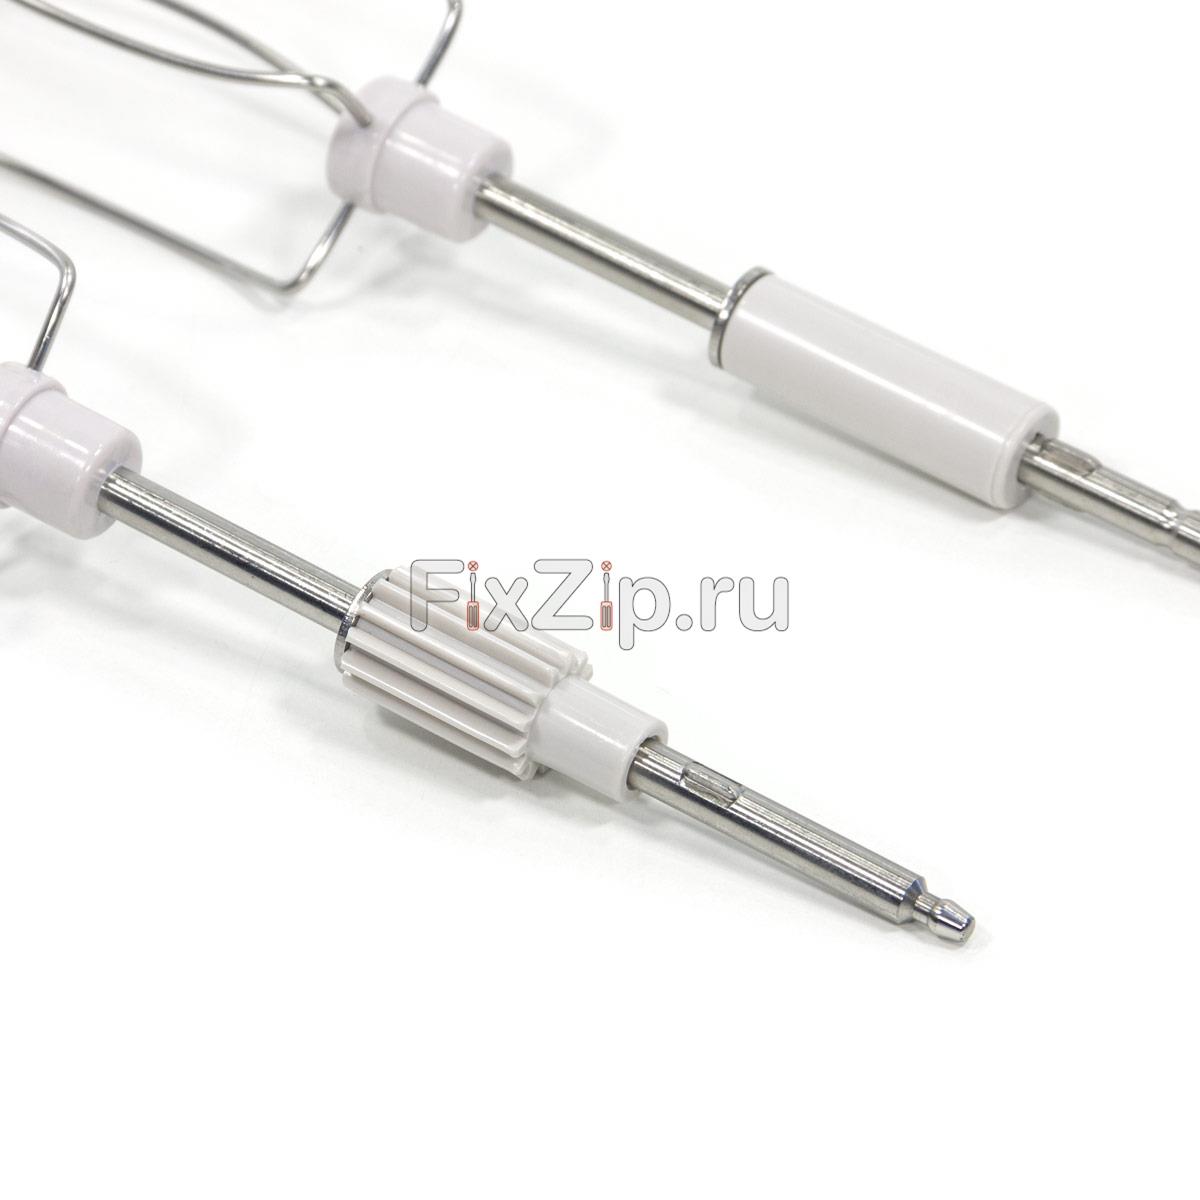 Tefal Whisk Set for Prep Line Mixer No SS-989642 